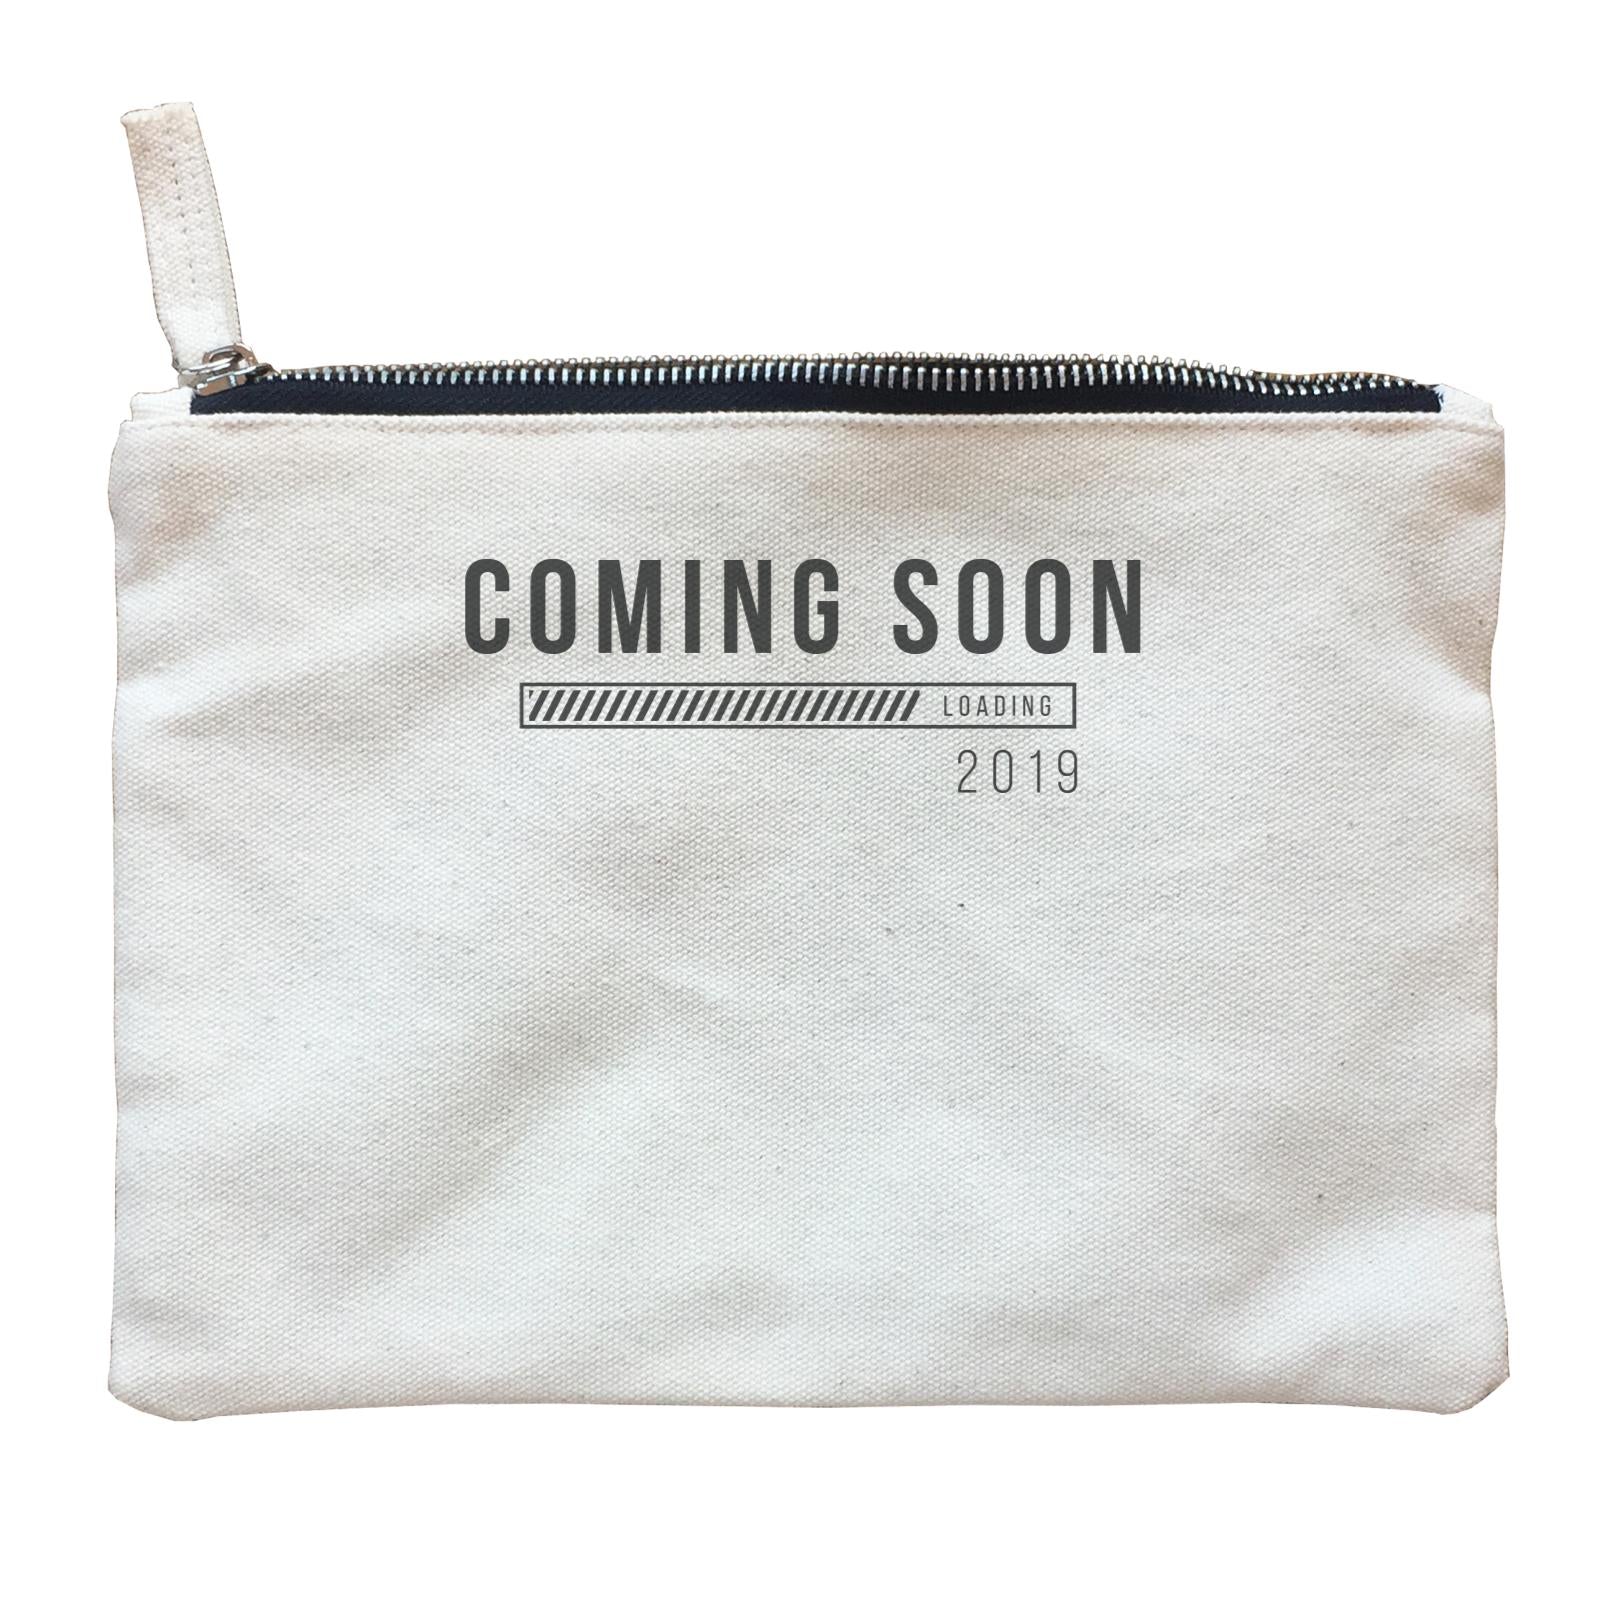 Coming Soon Family Coming Soon Loading Add Date Zipper Pouch